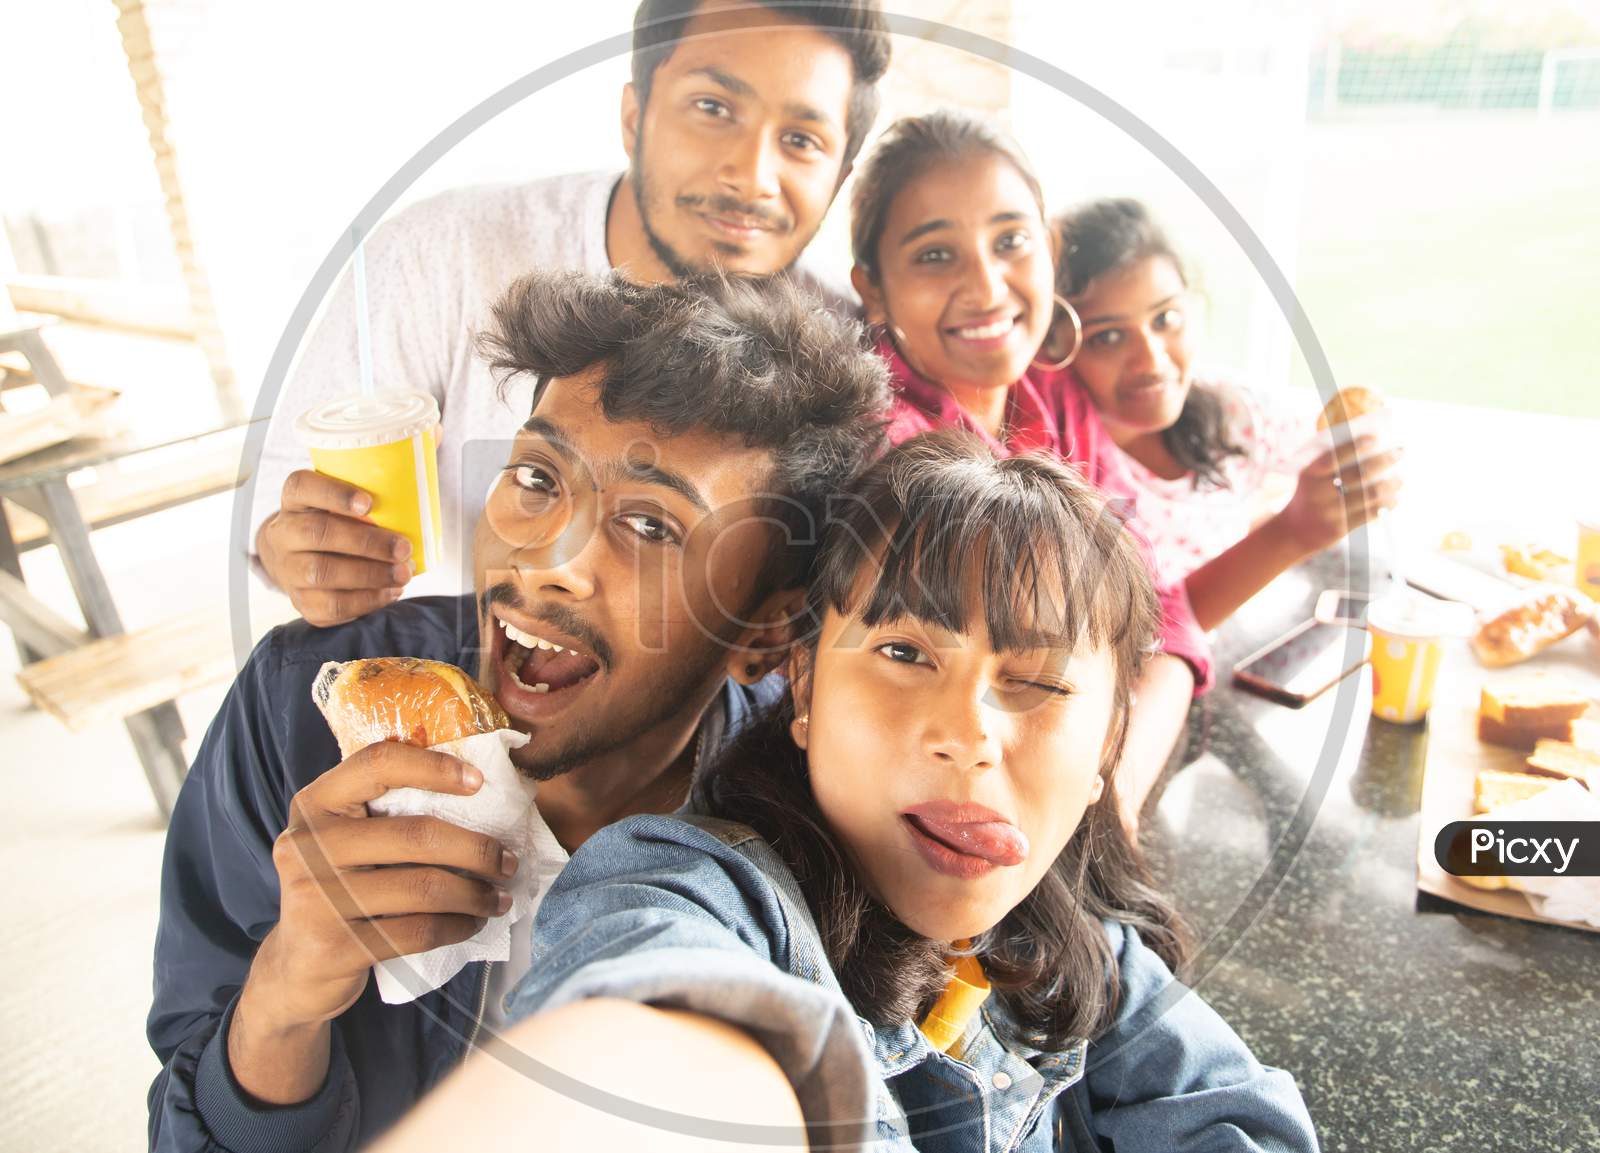 A Group of Young People Taking Selfies using Mobile phones or Smartphone While having their Food